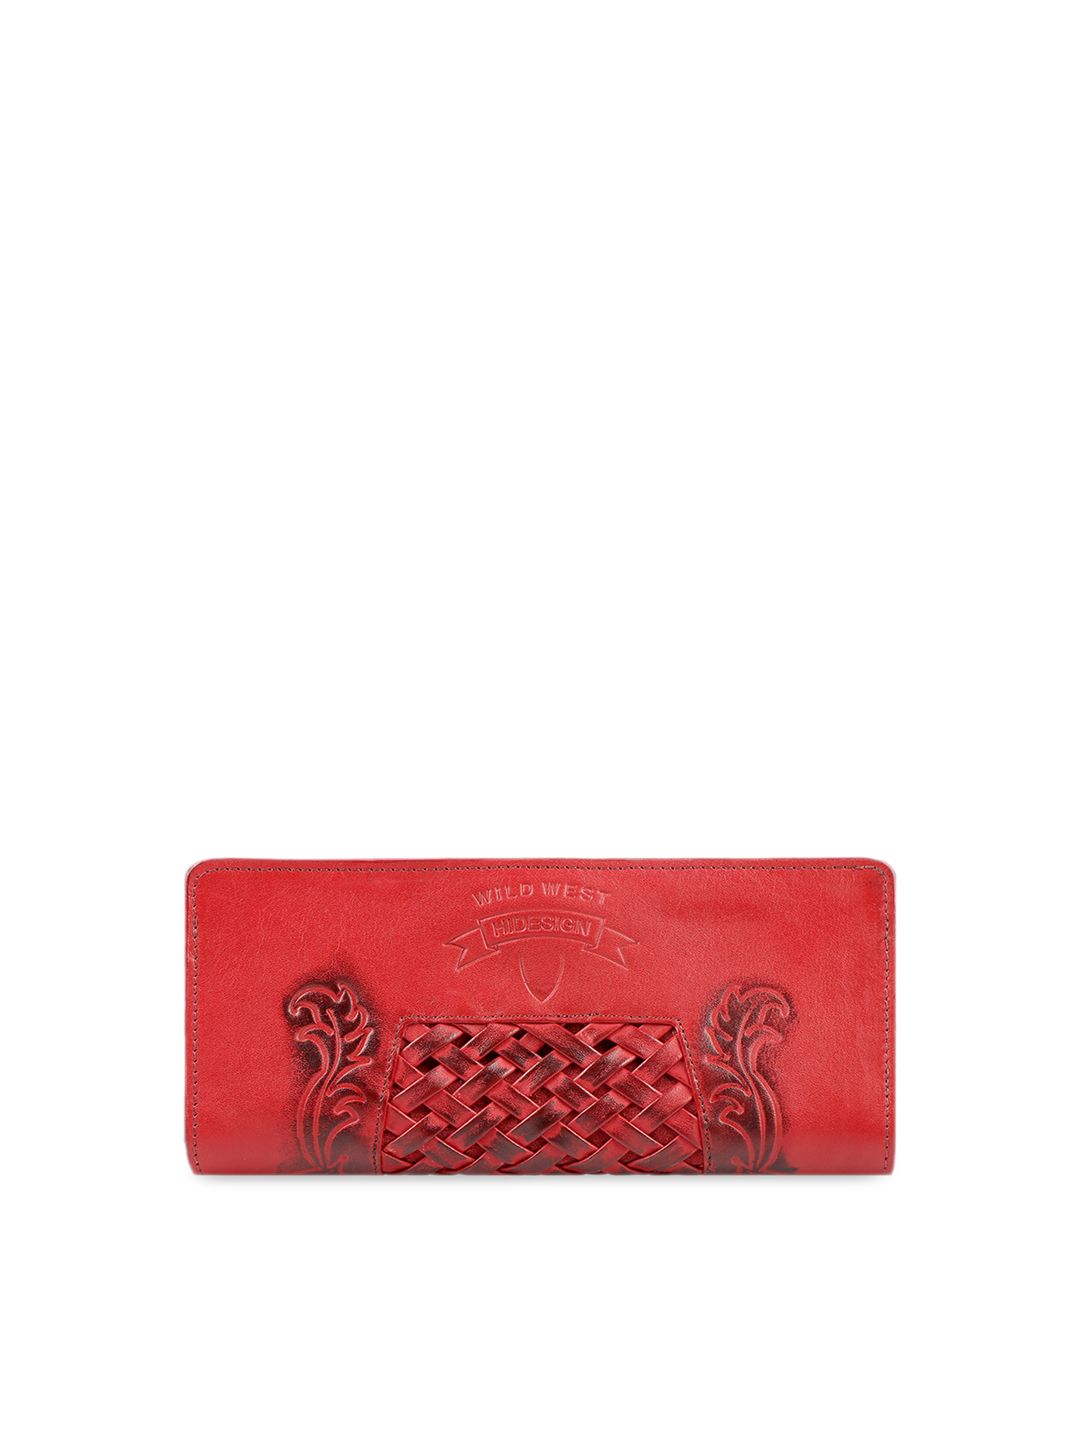 Hidesign Women Red Textured Two Fold Leather Wallet Price in India